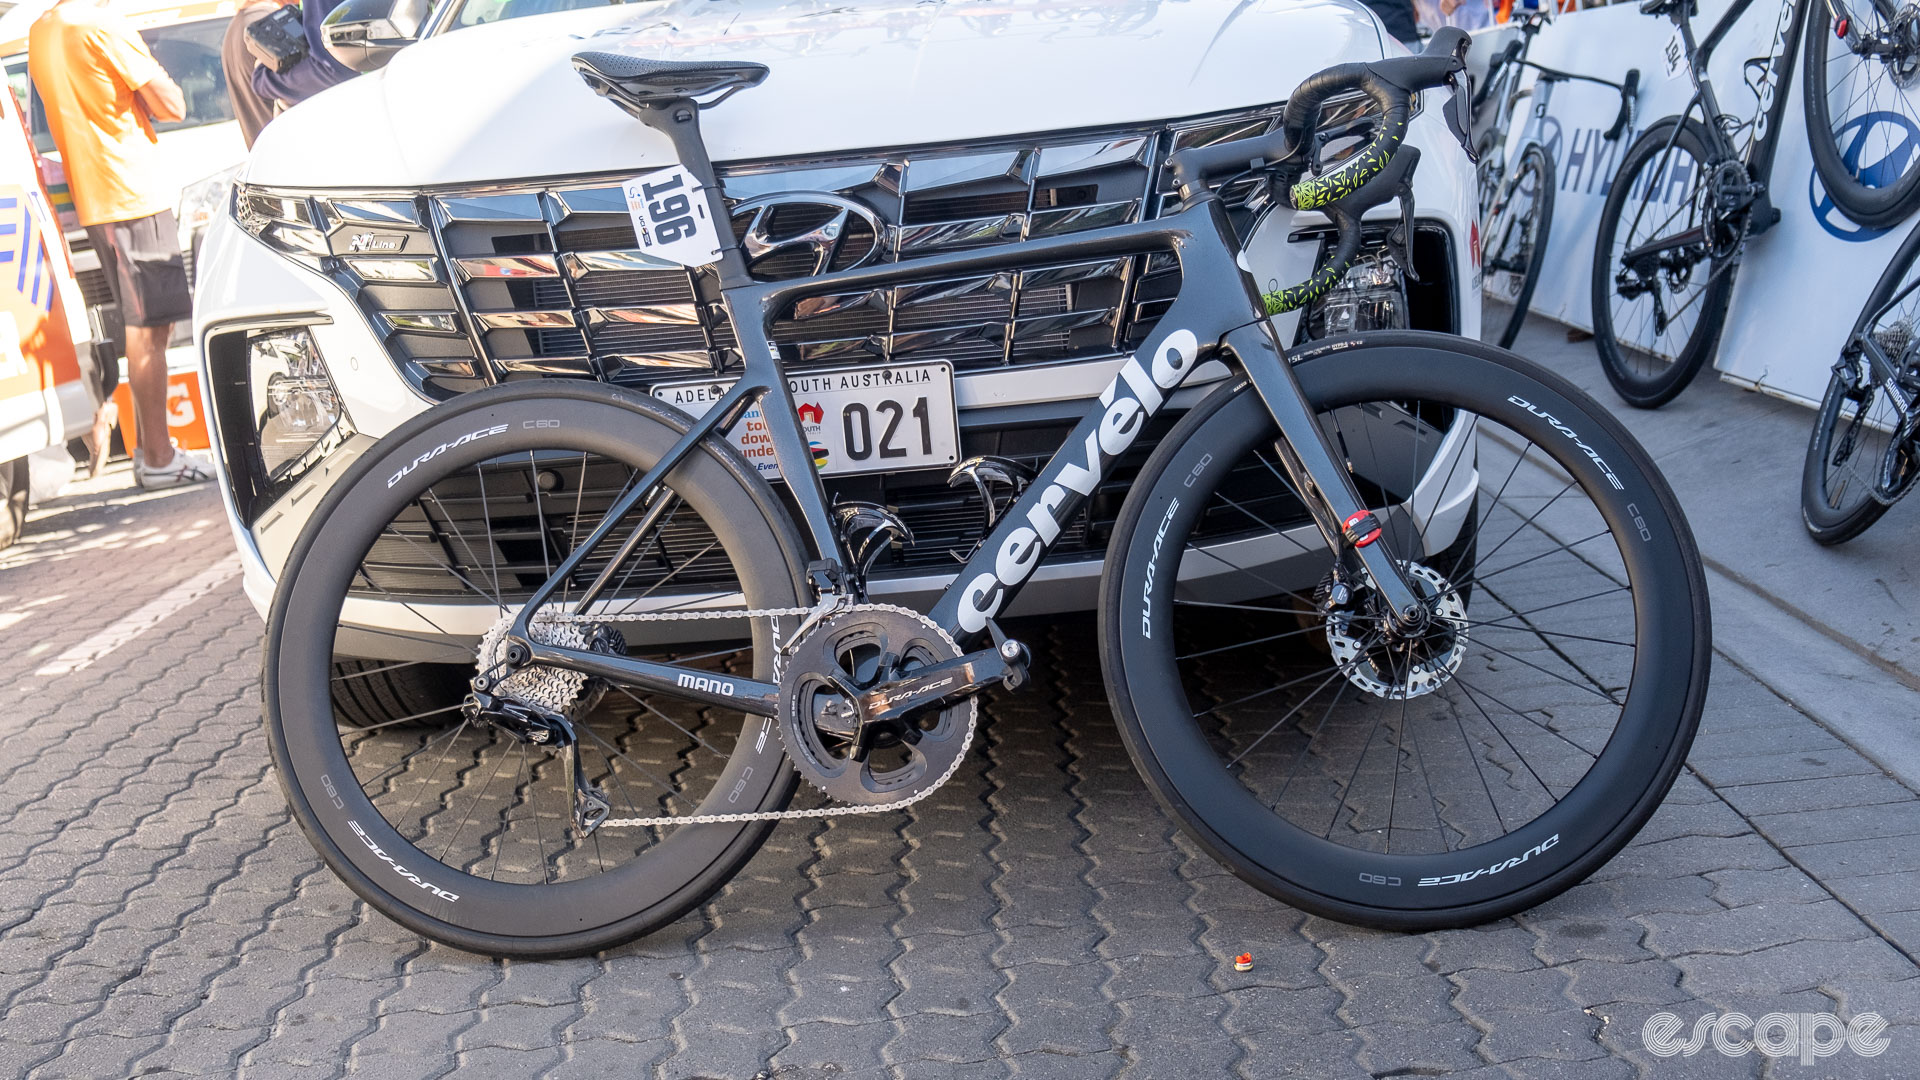 The photo shows Jackson Medway's Cervelo Soloist.